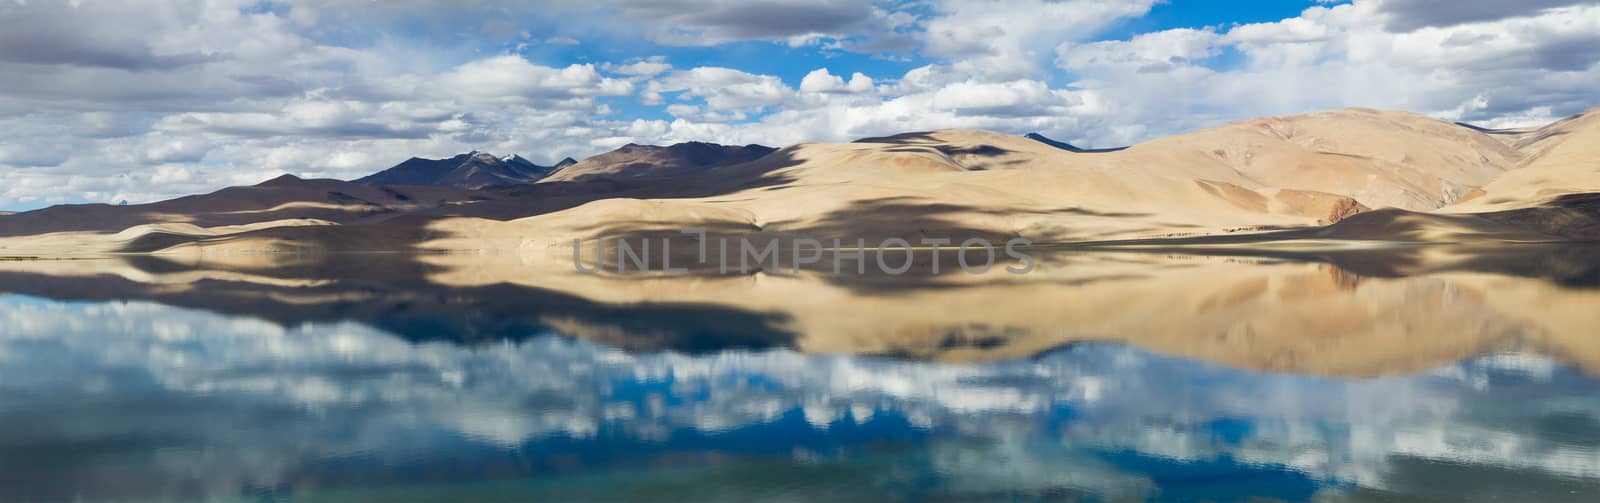 Tsomoriri mountain lake panorama with mountains and blue sky ref by straannick